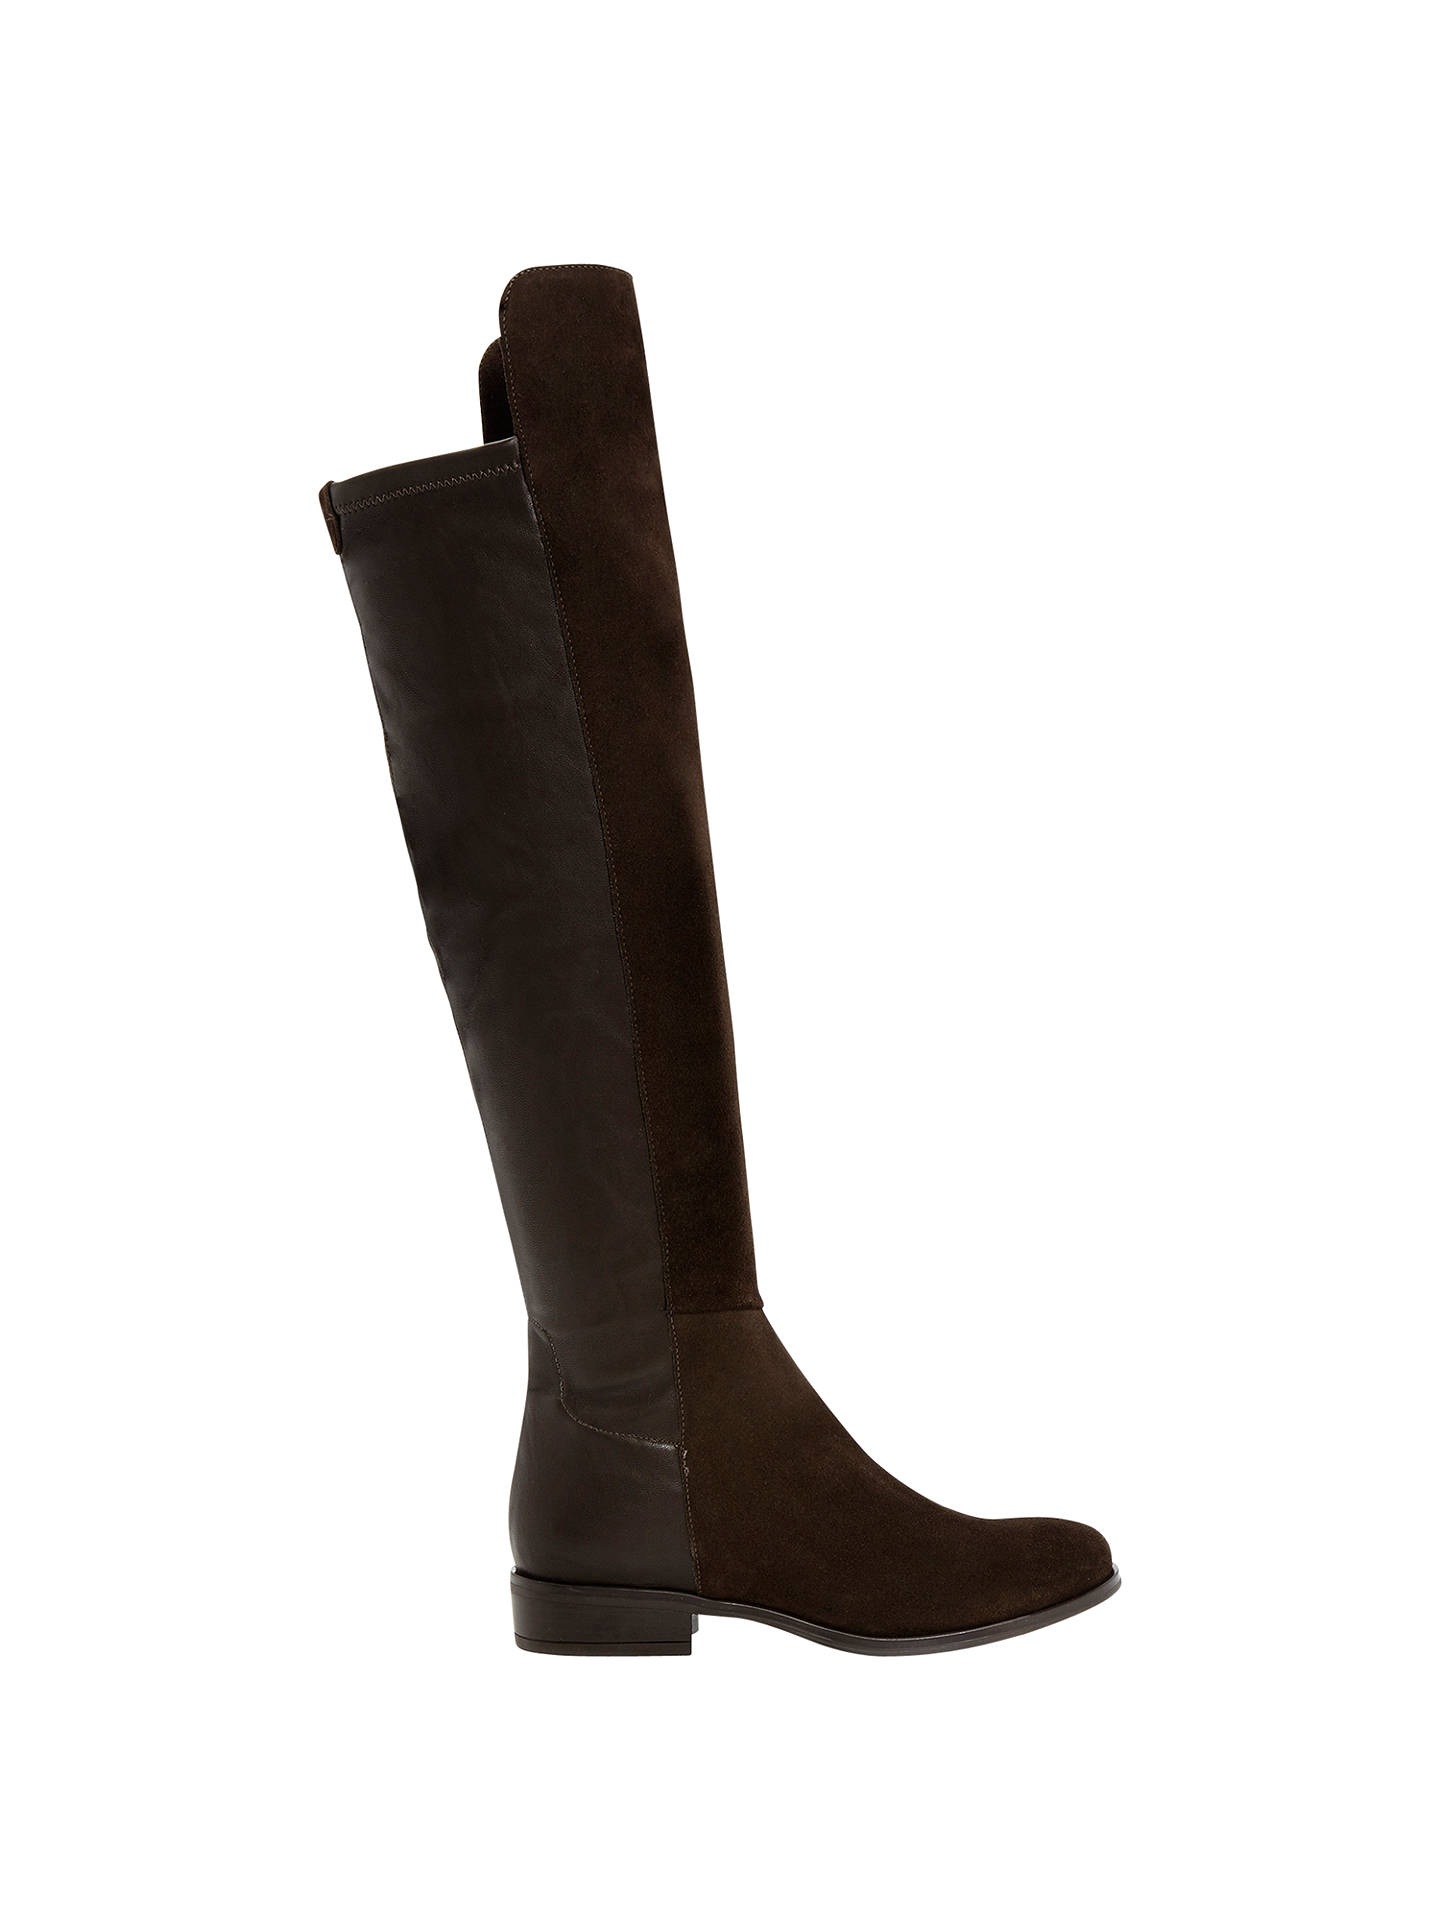 Dune Trish Over The Knee Boots, Brown Suede at John Lewis & Partners